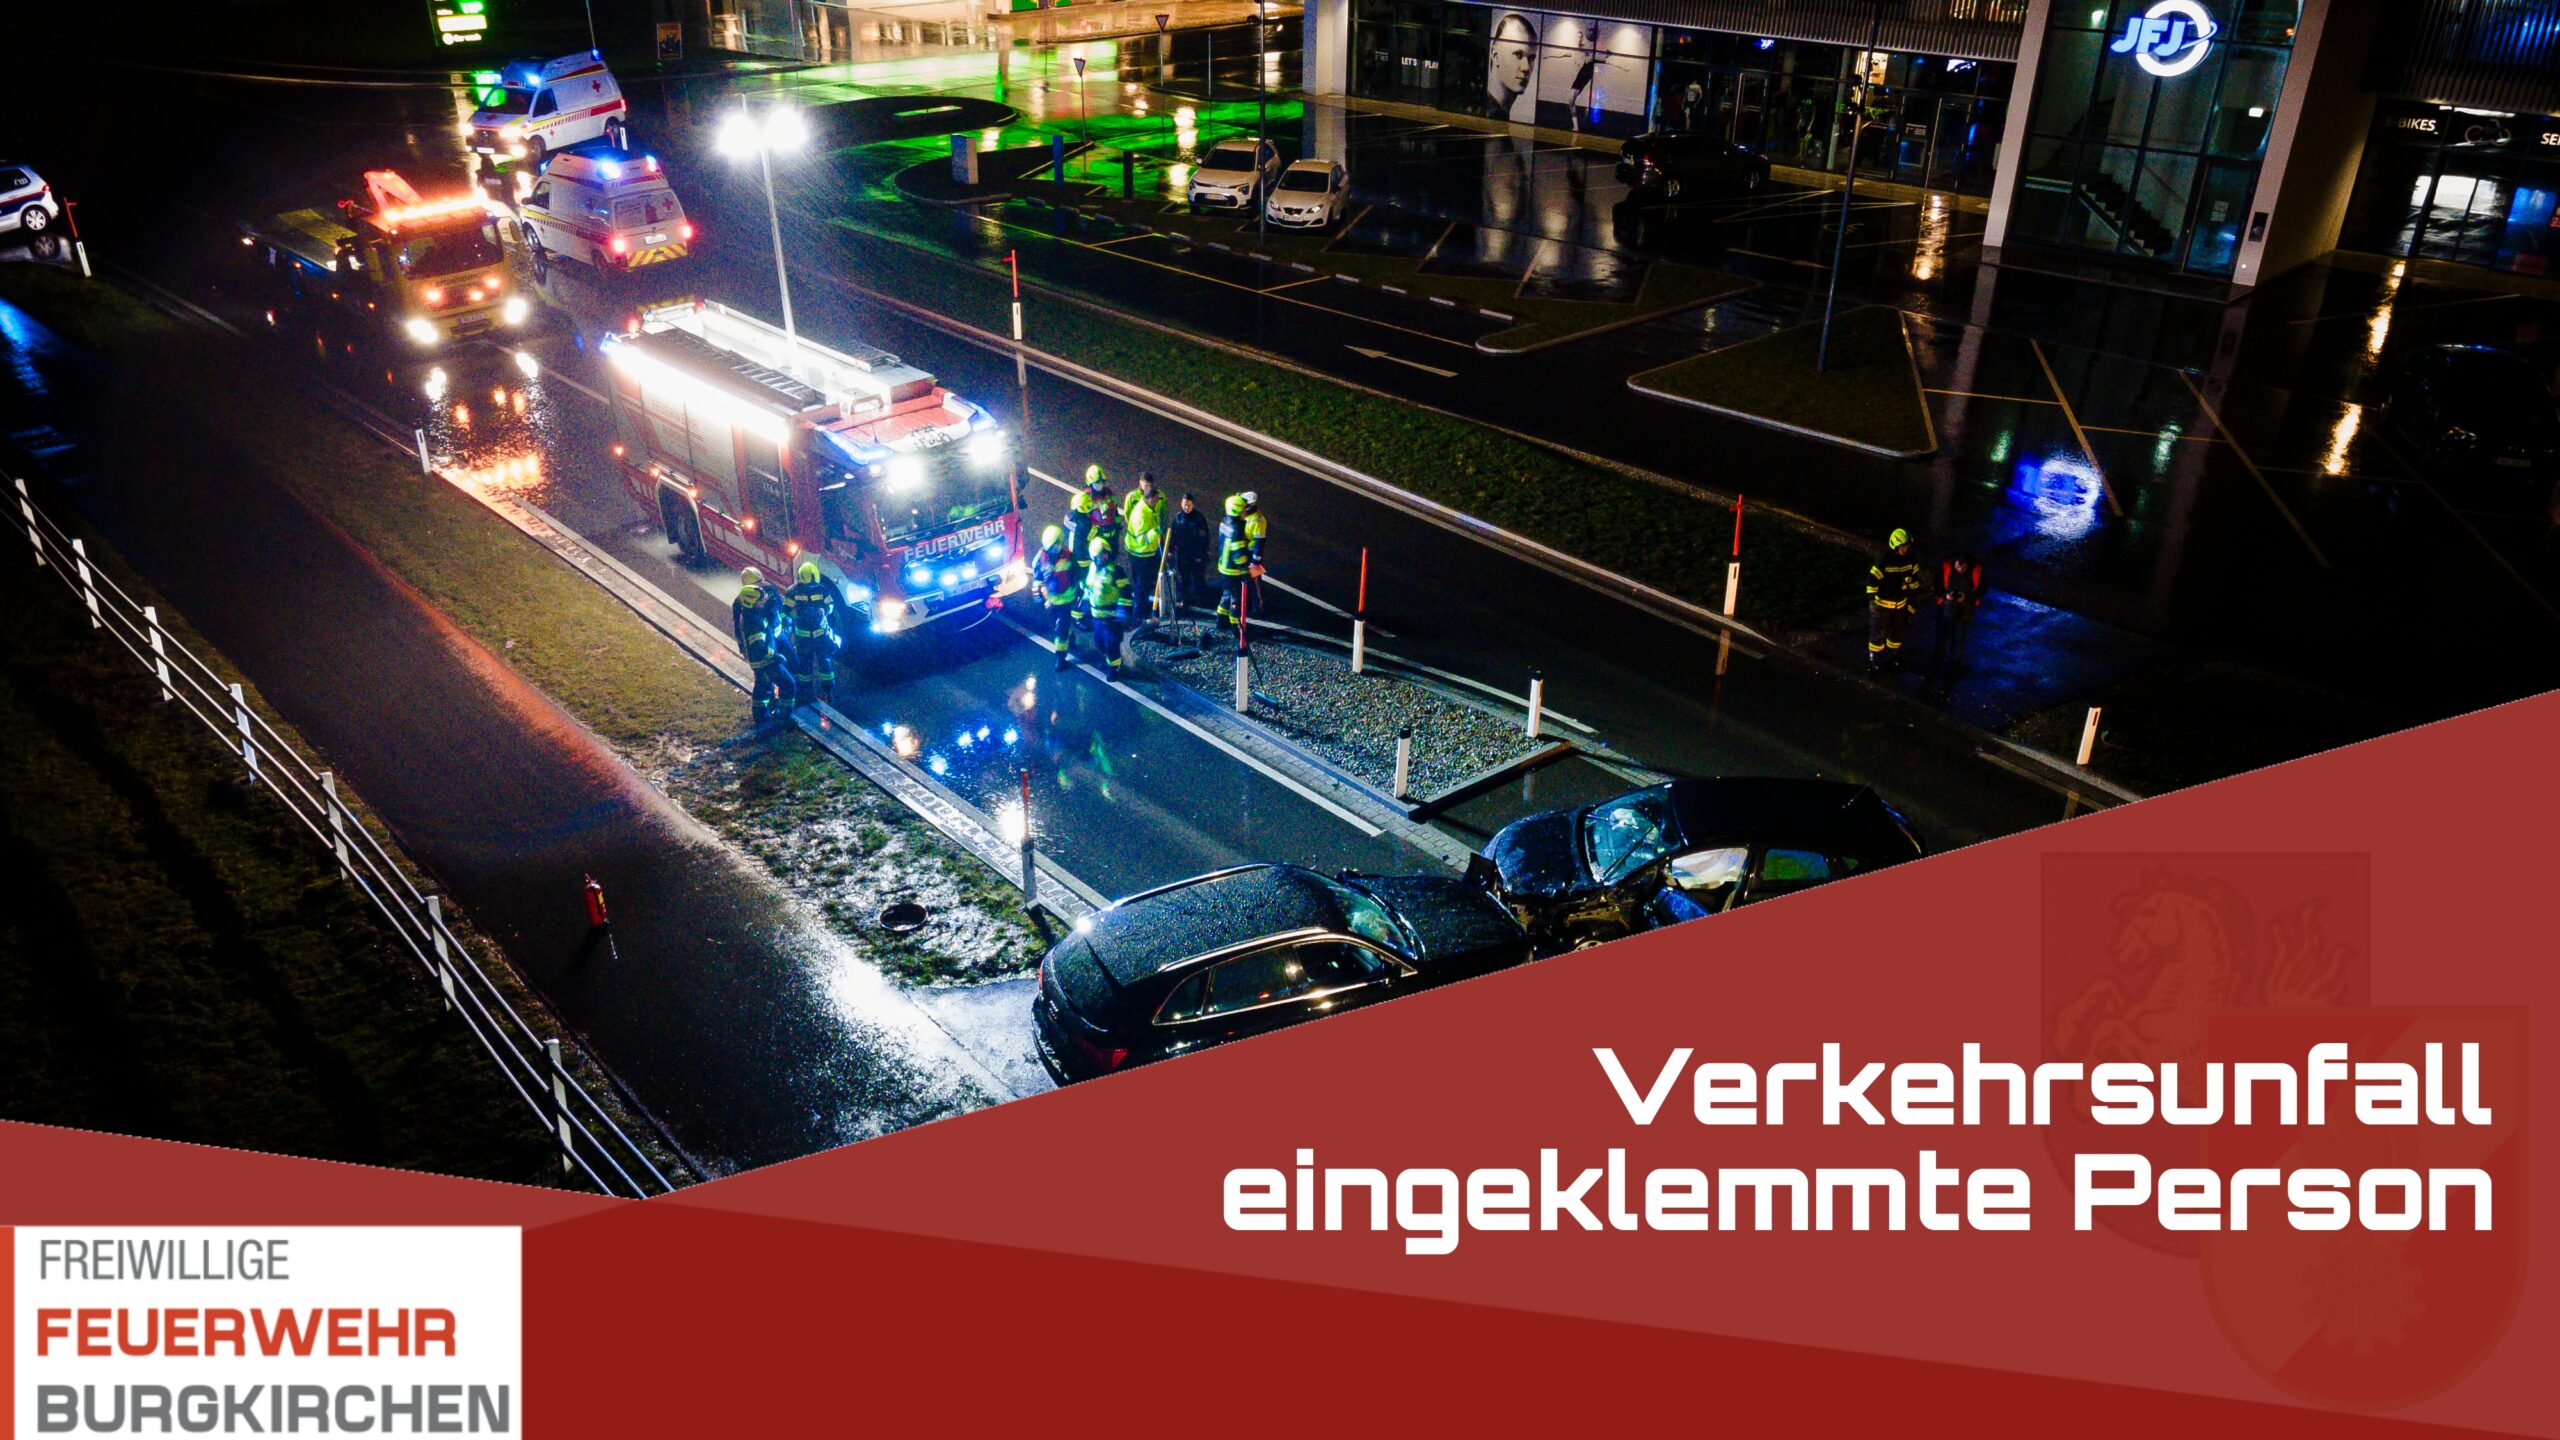 You are currently viewing Verkehrsunfall eingeklemmte Person